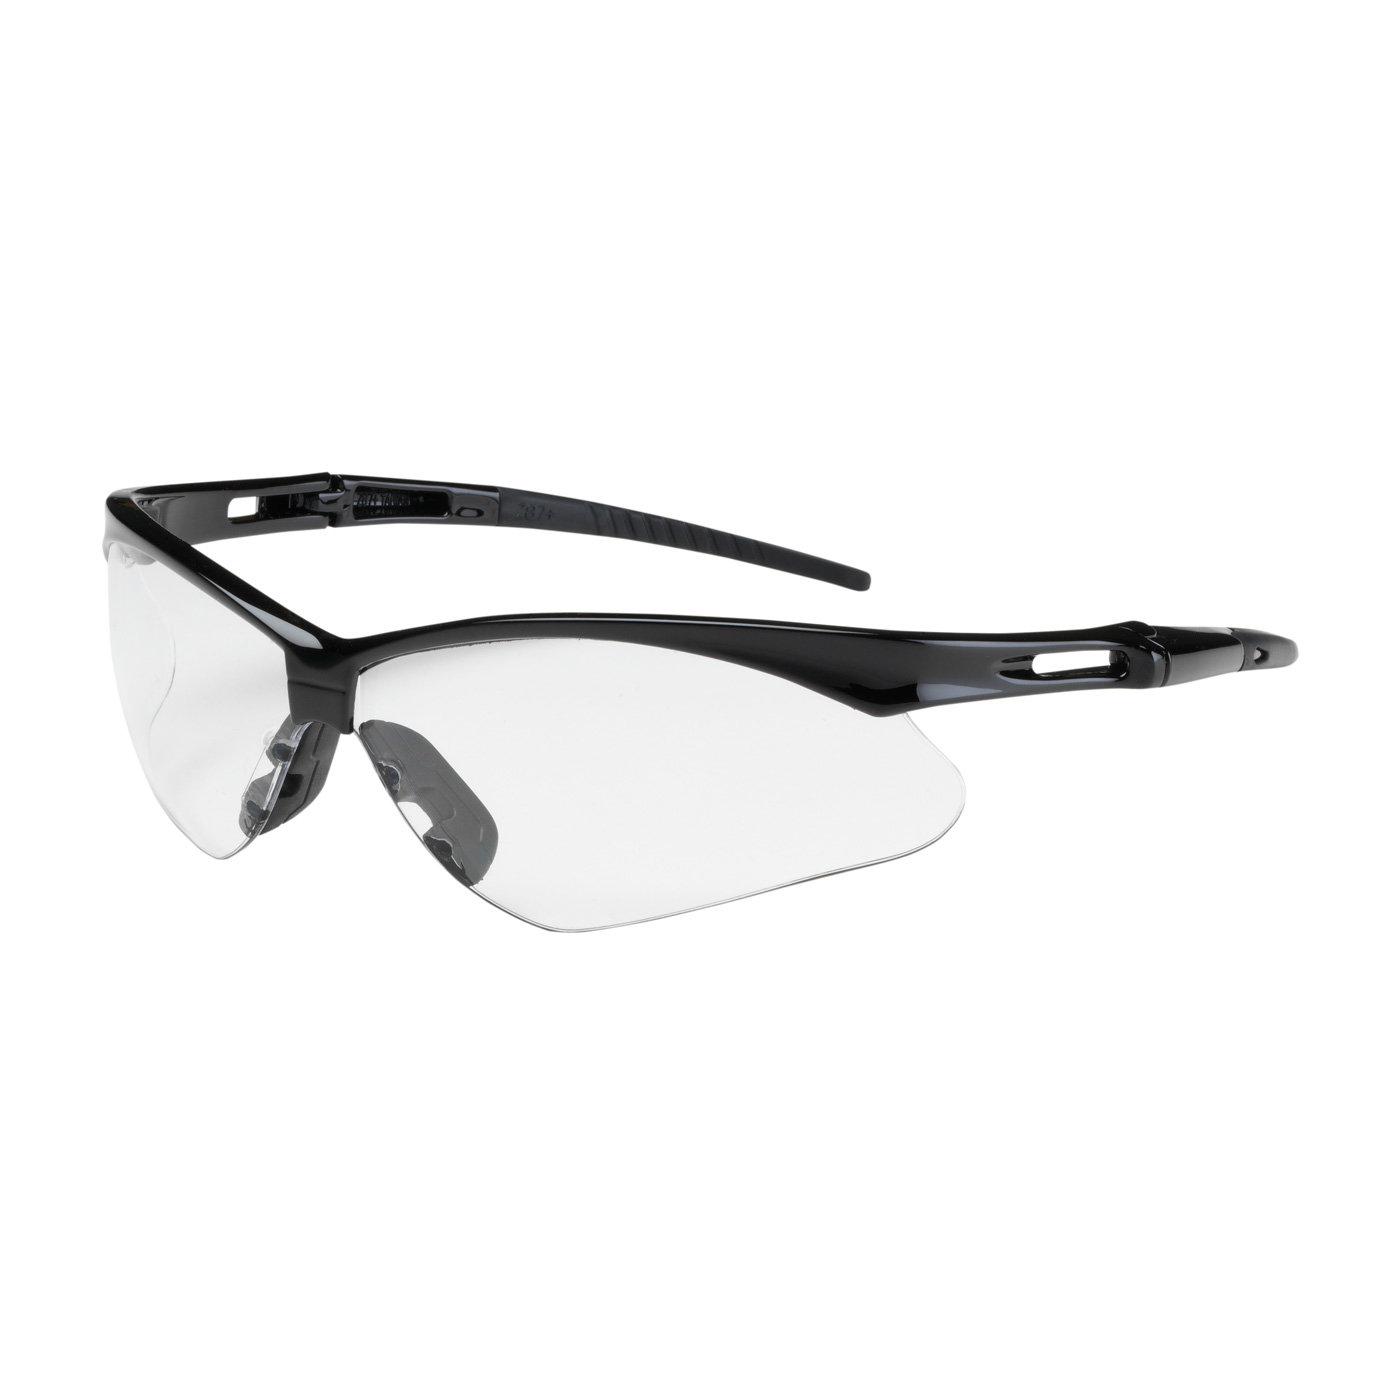 PIP 250-AN-10110 Anser Semi-Rimless Safety Glasses with Black Frame, Clear Lens and Anti-Scratch Coating PID-250 AN 10110